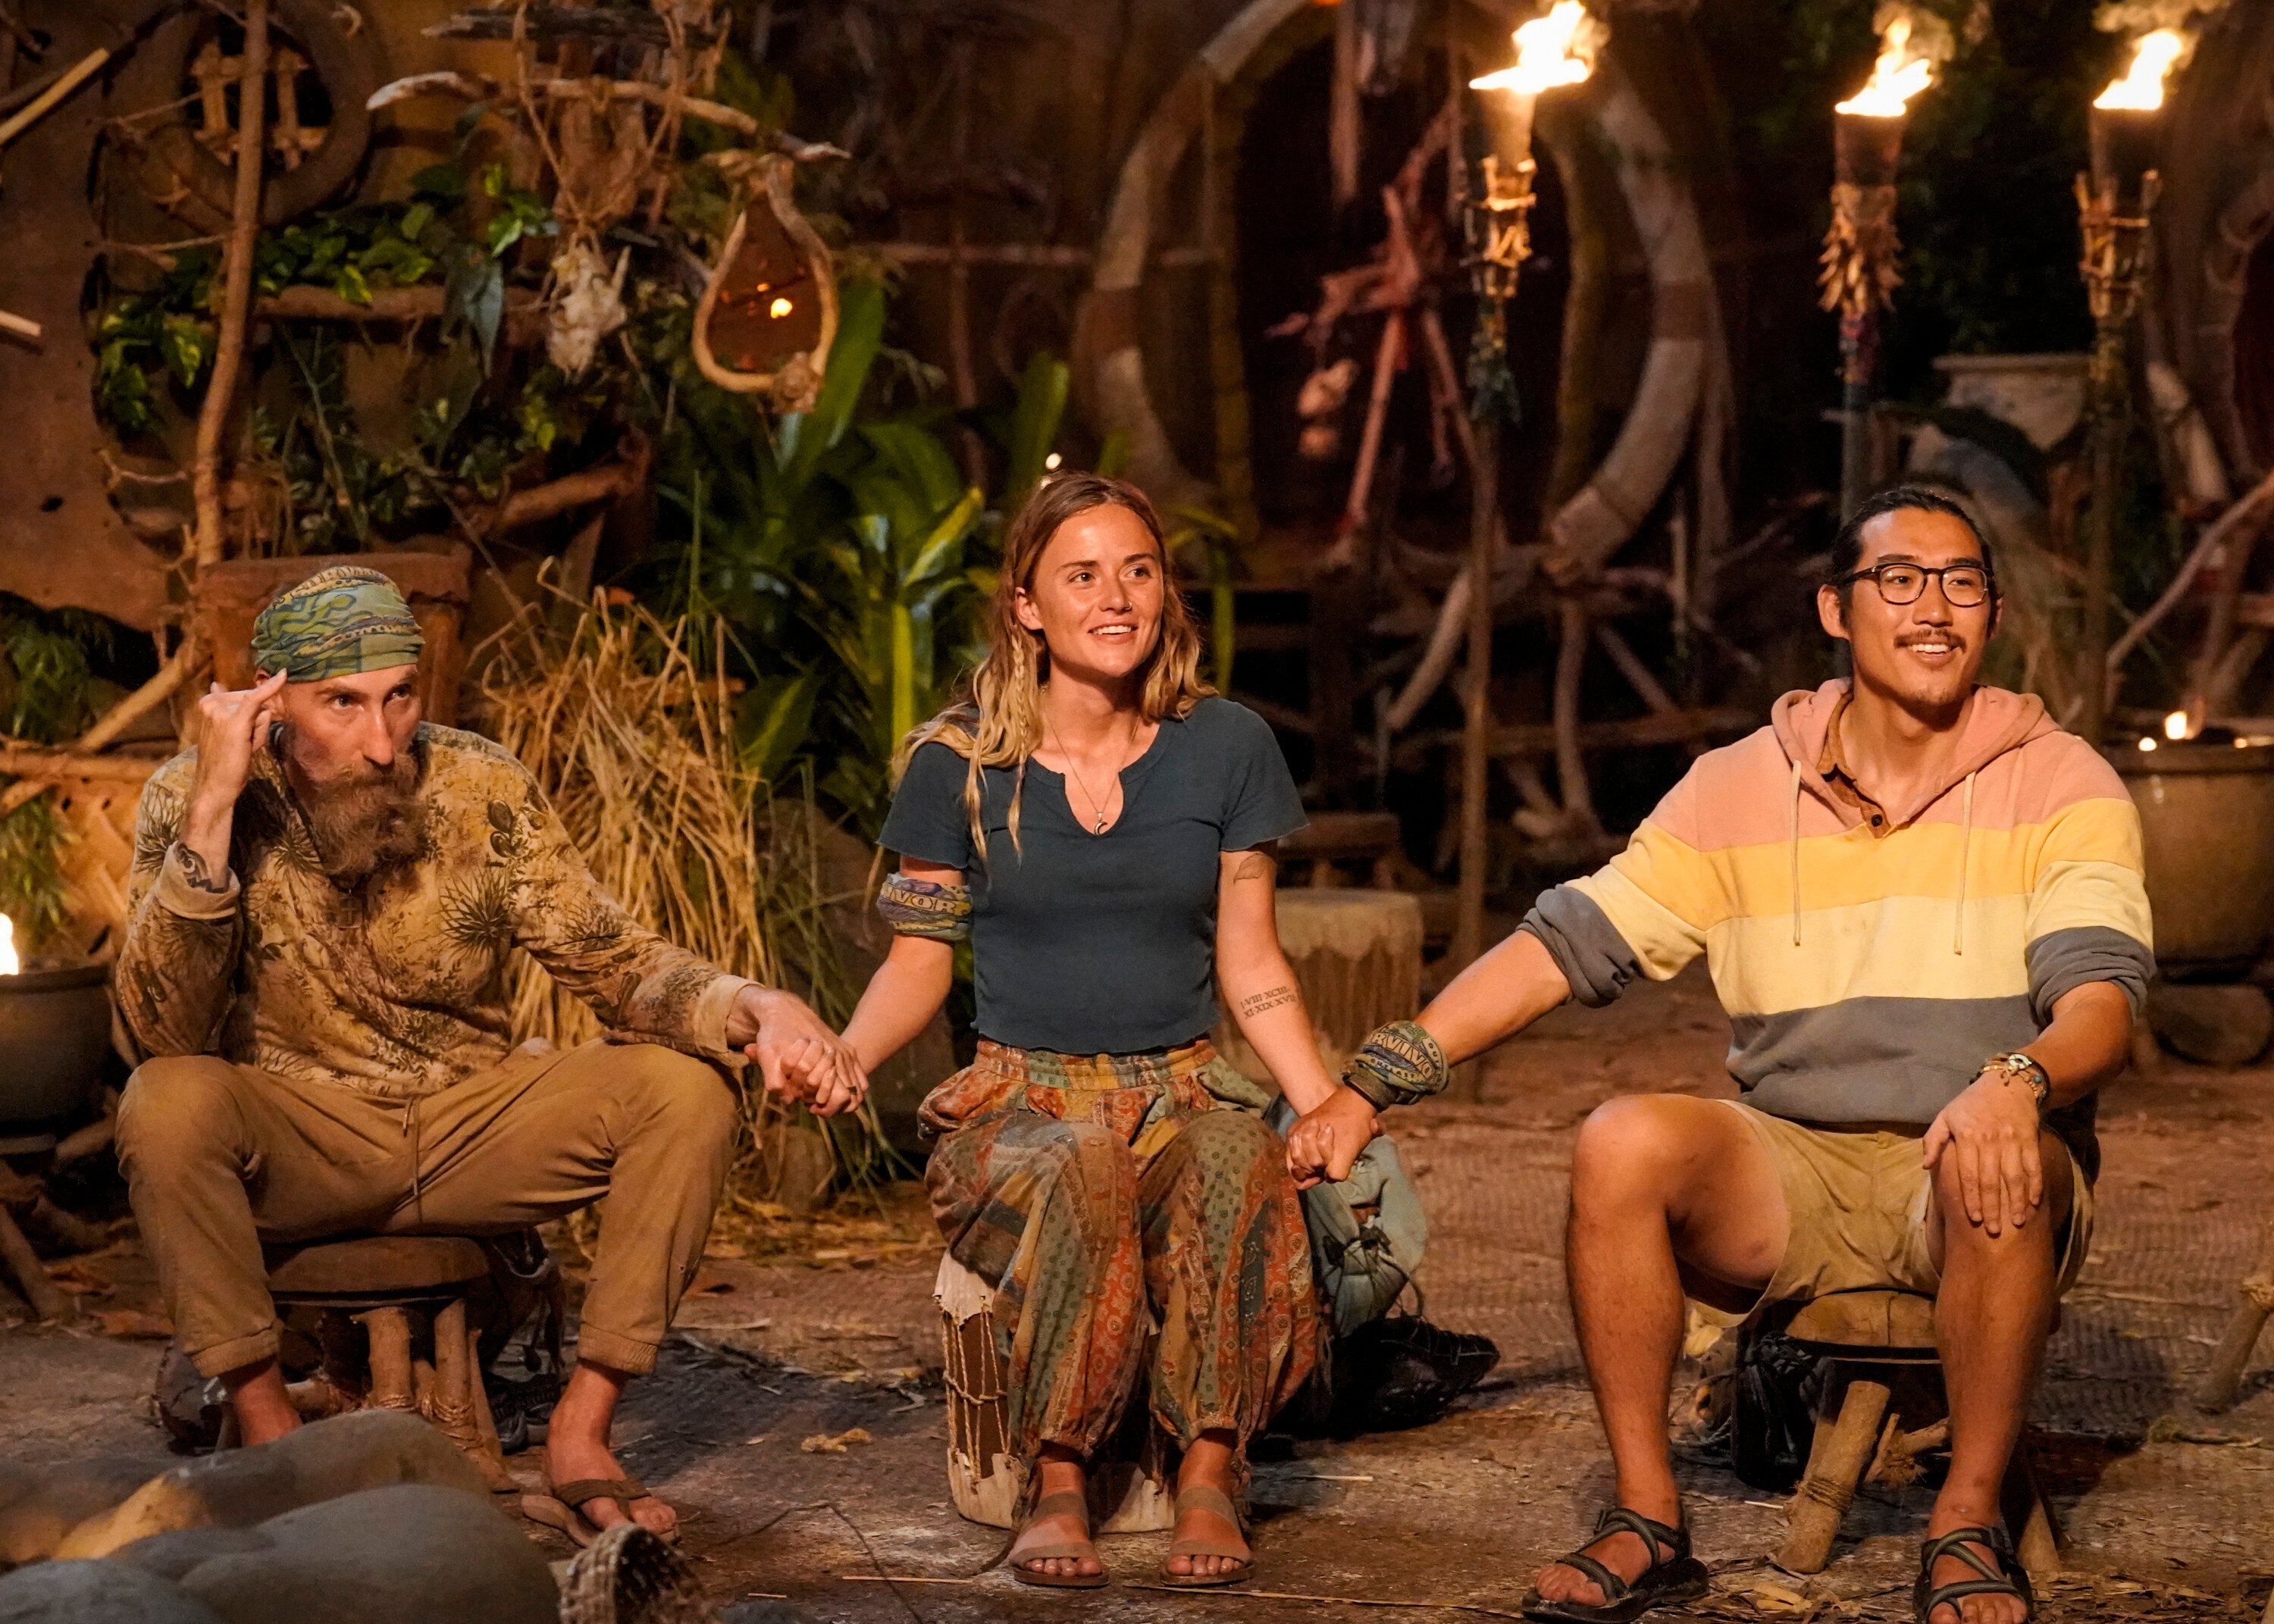 Mike Gabler, Cassidy Clark, and Owen Knight hold hands during the Final Tribal Council in 'Survivor' Season 43 on CBS.